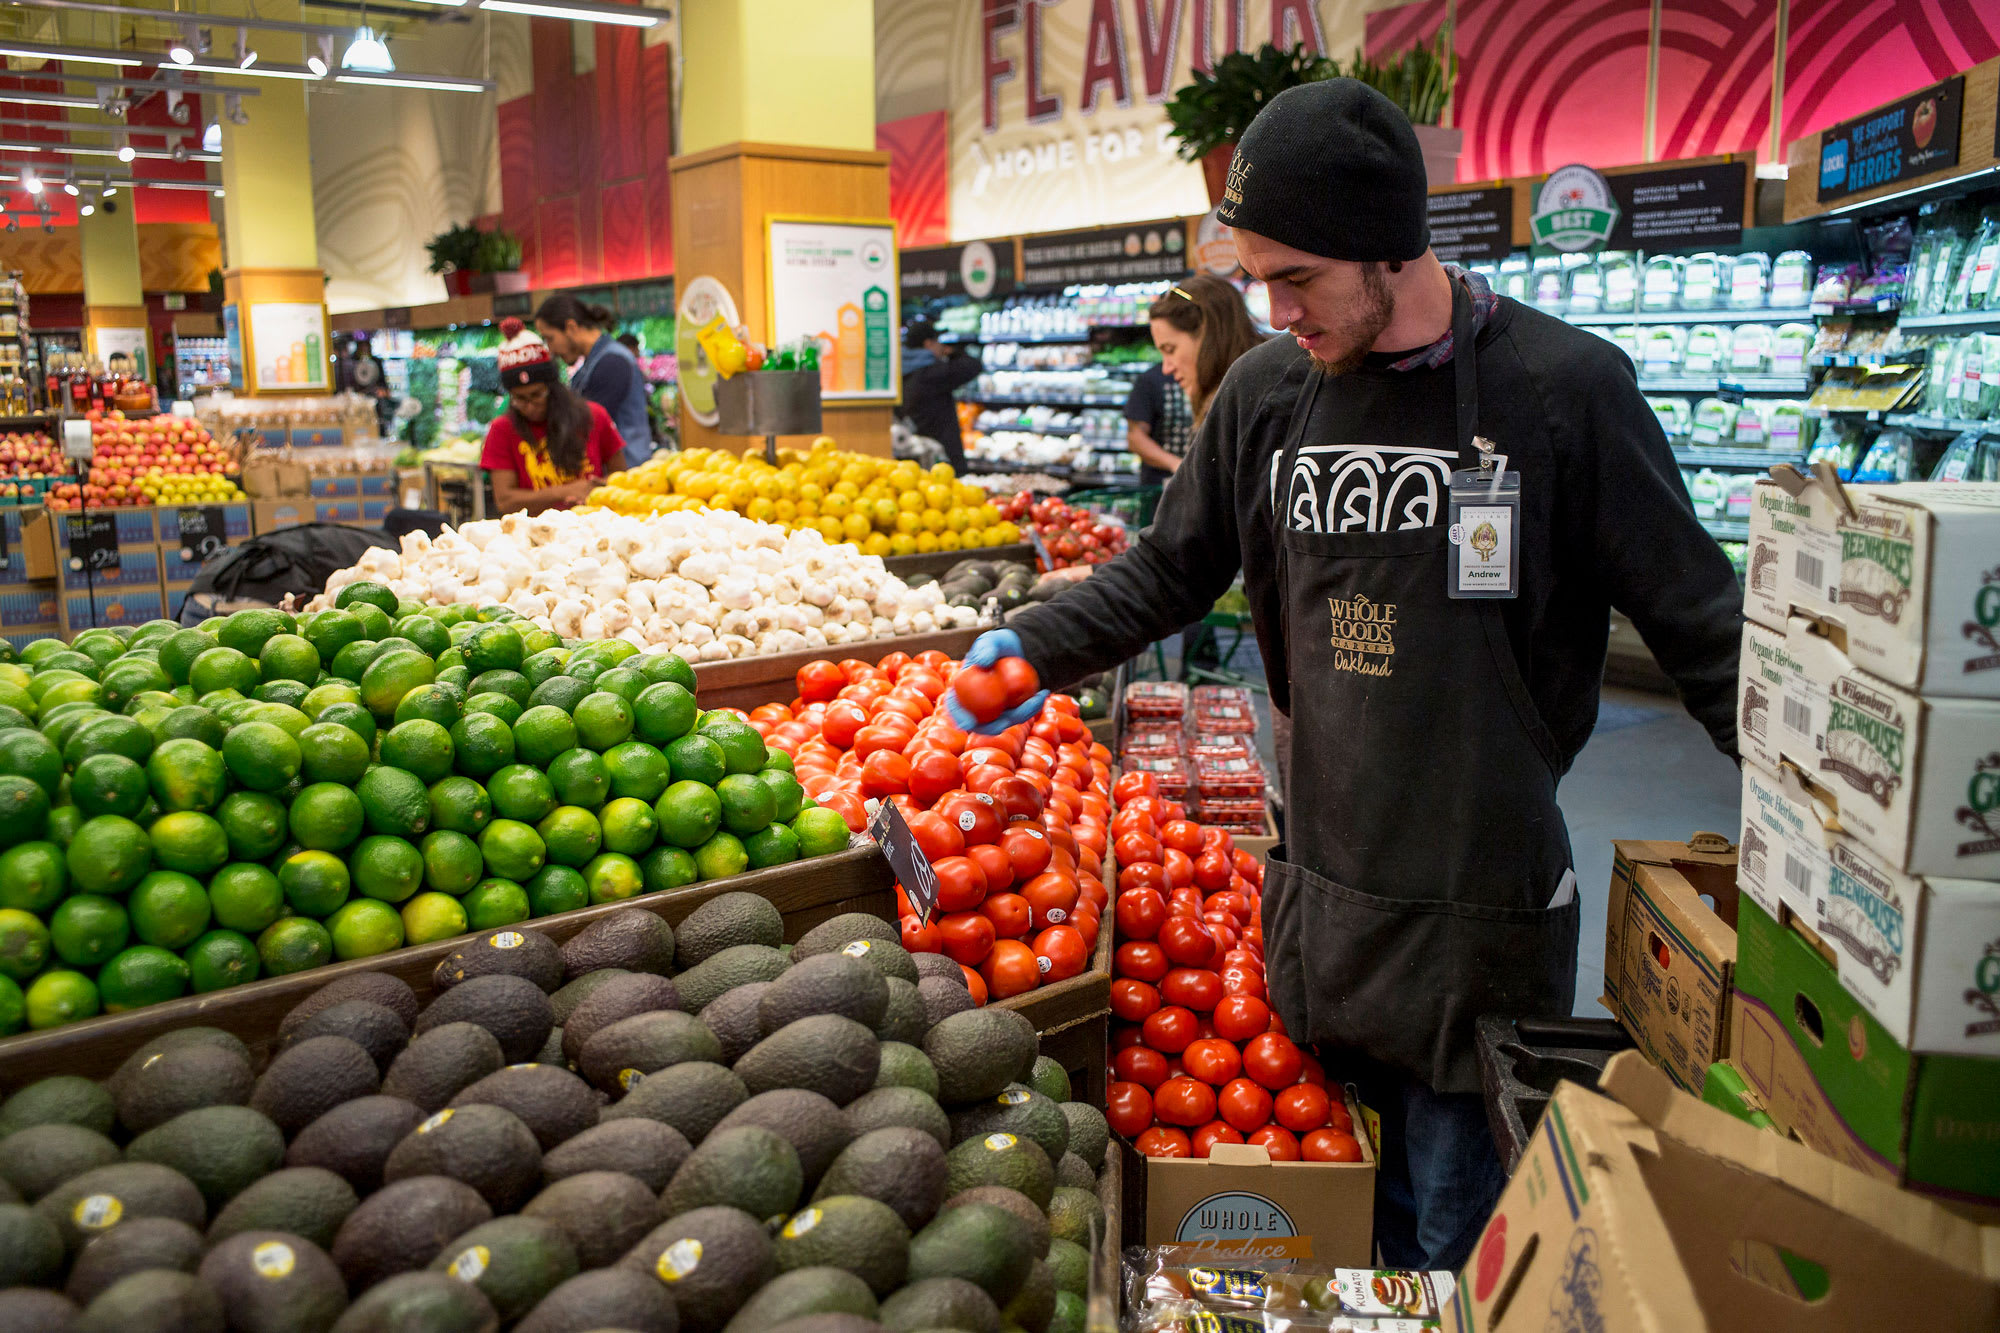 Whole Foods to cut healthcare for 1,900 part-time employees in 2020